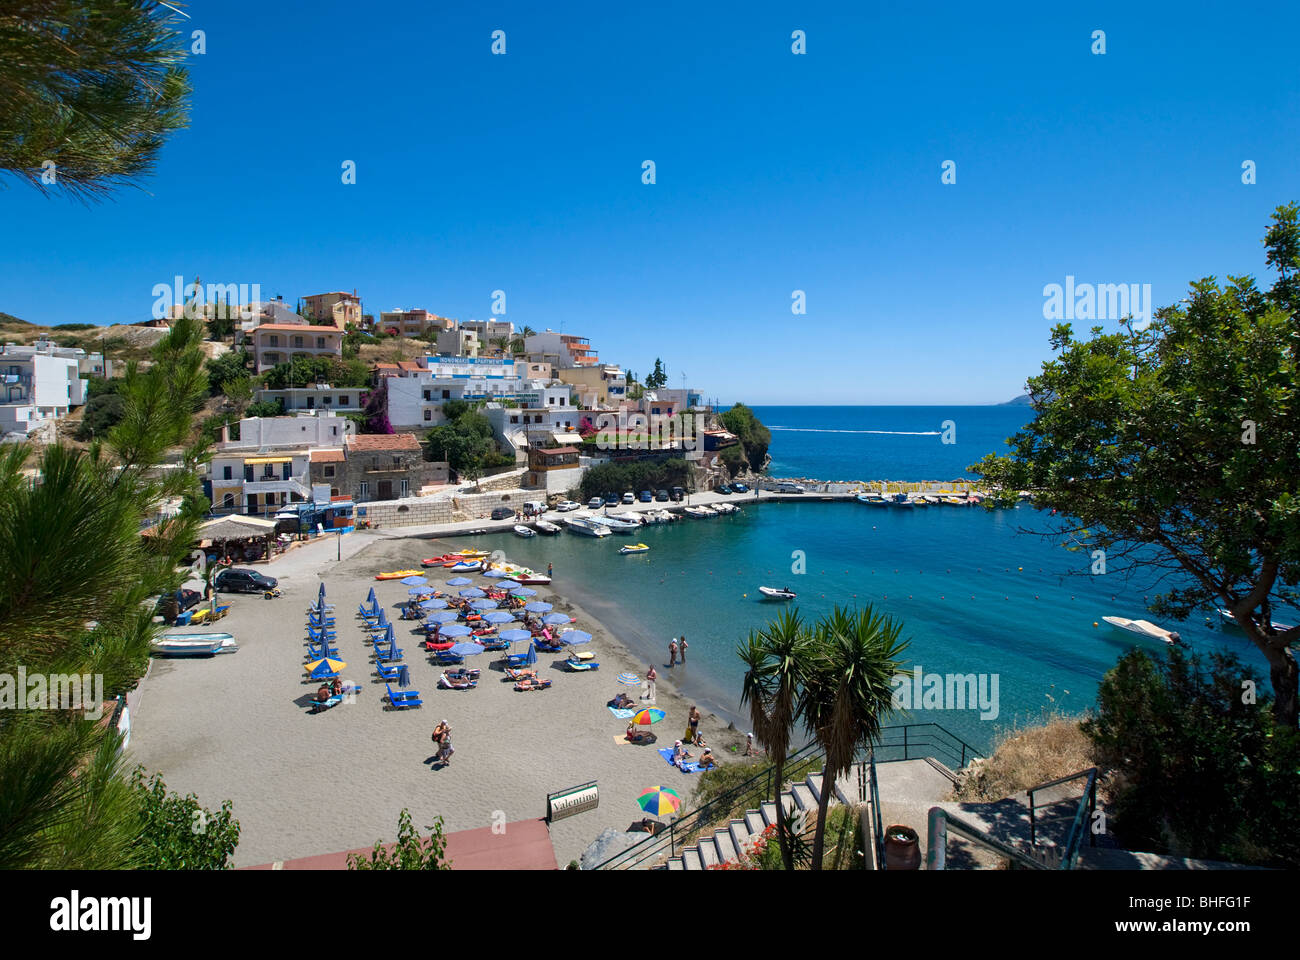 Bali Crete High Resolution Stock Photography and Images - Alamy